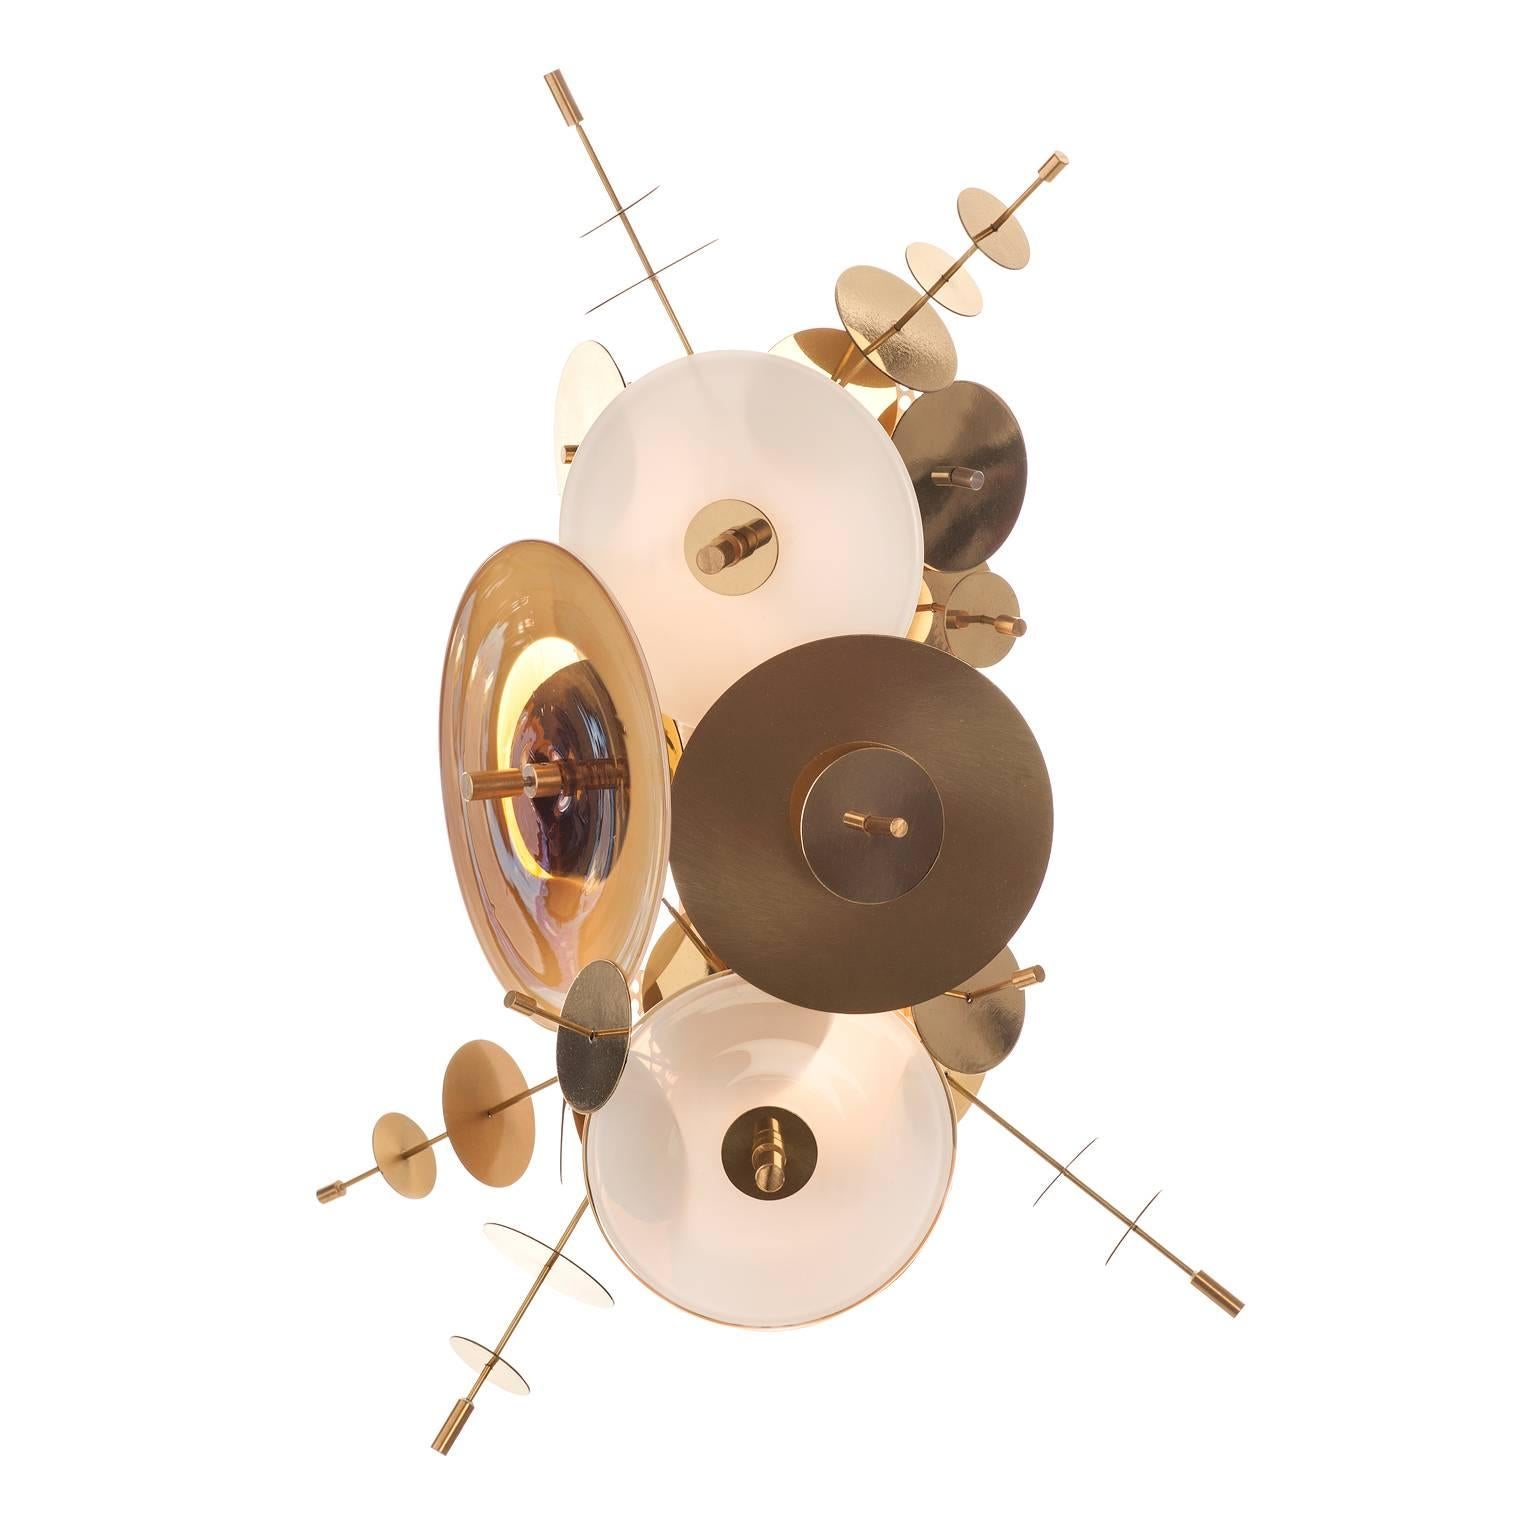 The Confetti Collection Sconce features hand blown glass discs in a variety of color palates combined with hand finished metallic disc accents.  

AVRAM RUSU STUDIO is a Brooklyn based design studio known for impeccably crafted and distinctly